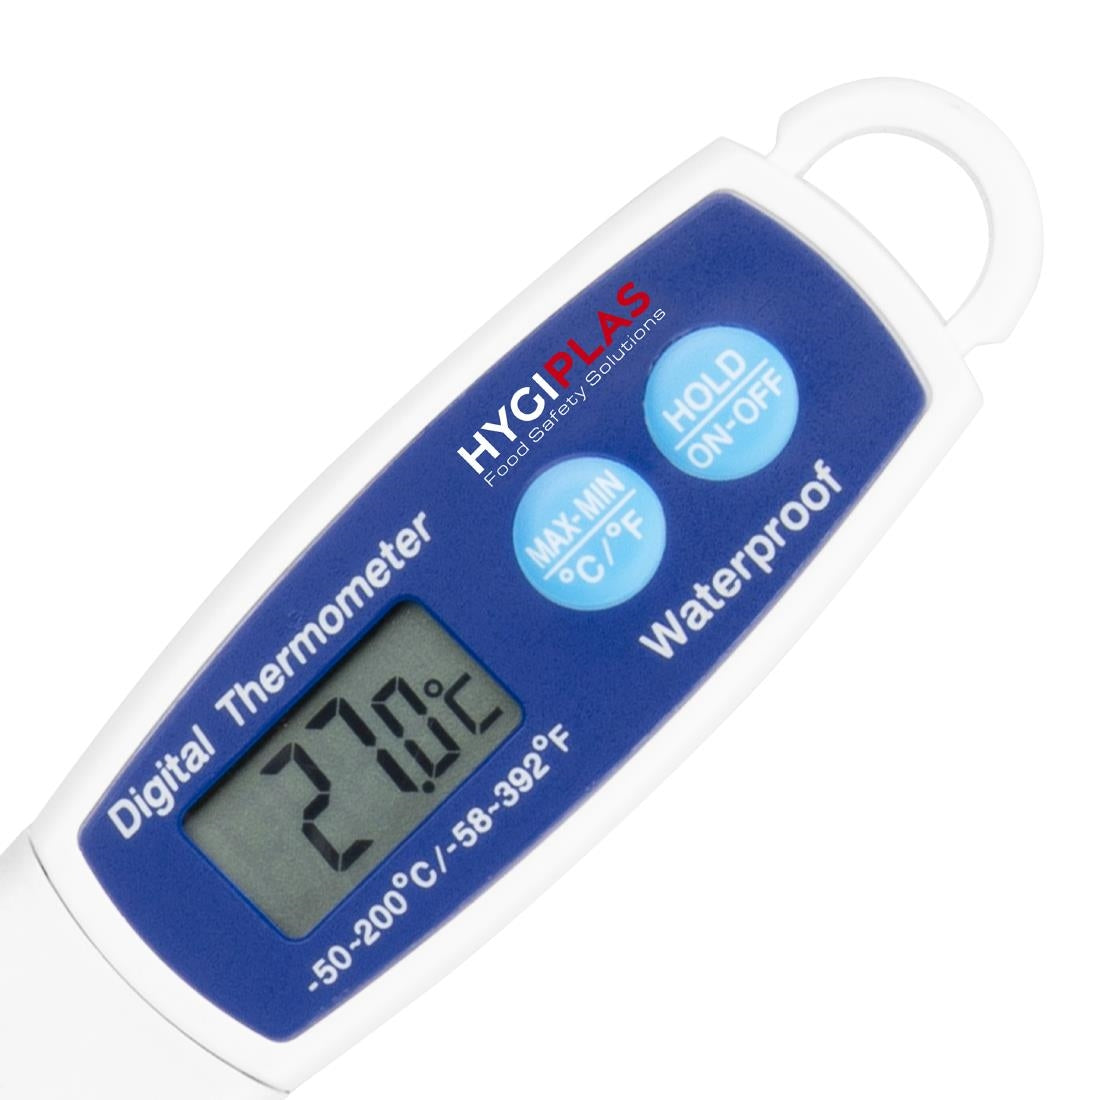 GH628 Hygiplas Digital Water Resistant Thermometer JD Catering Equipment Solutions Ltd